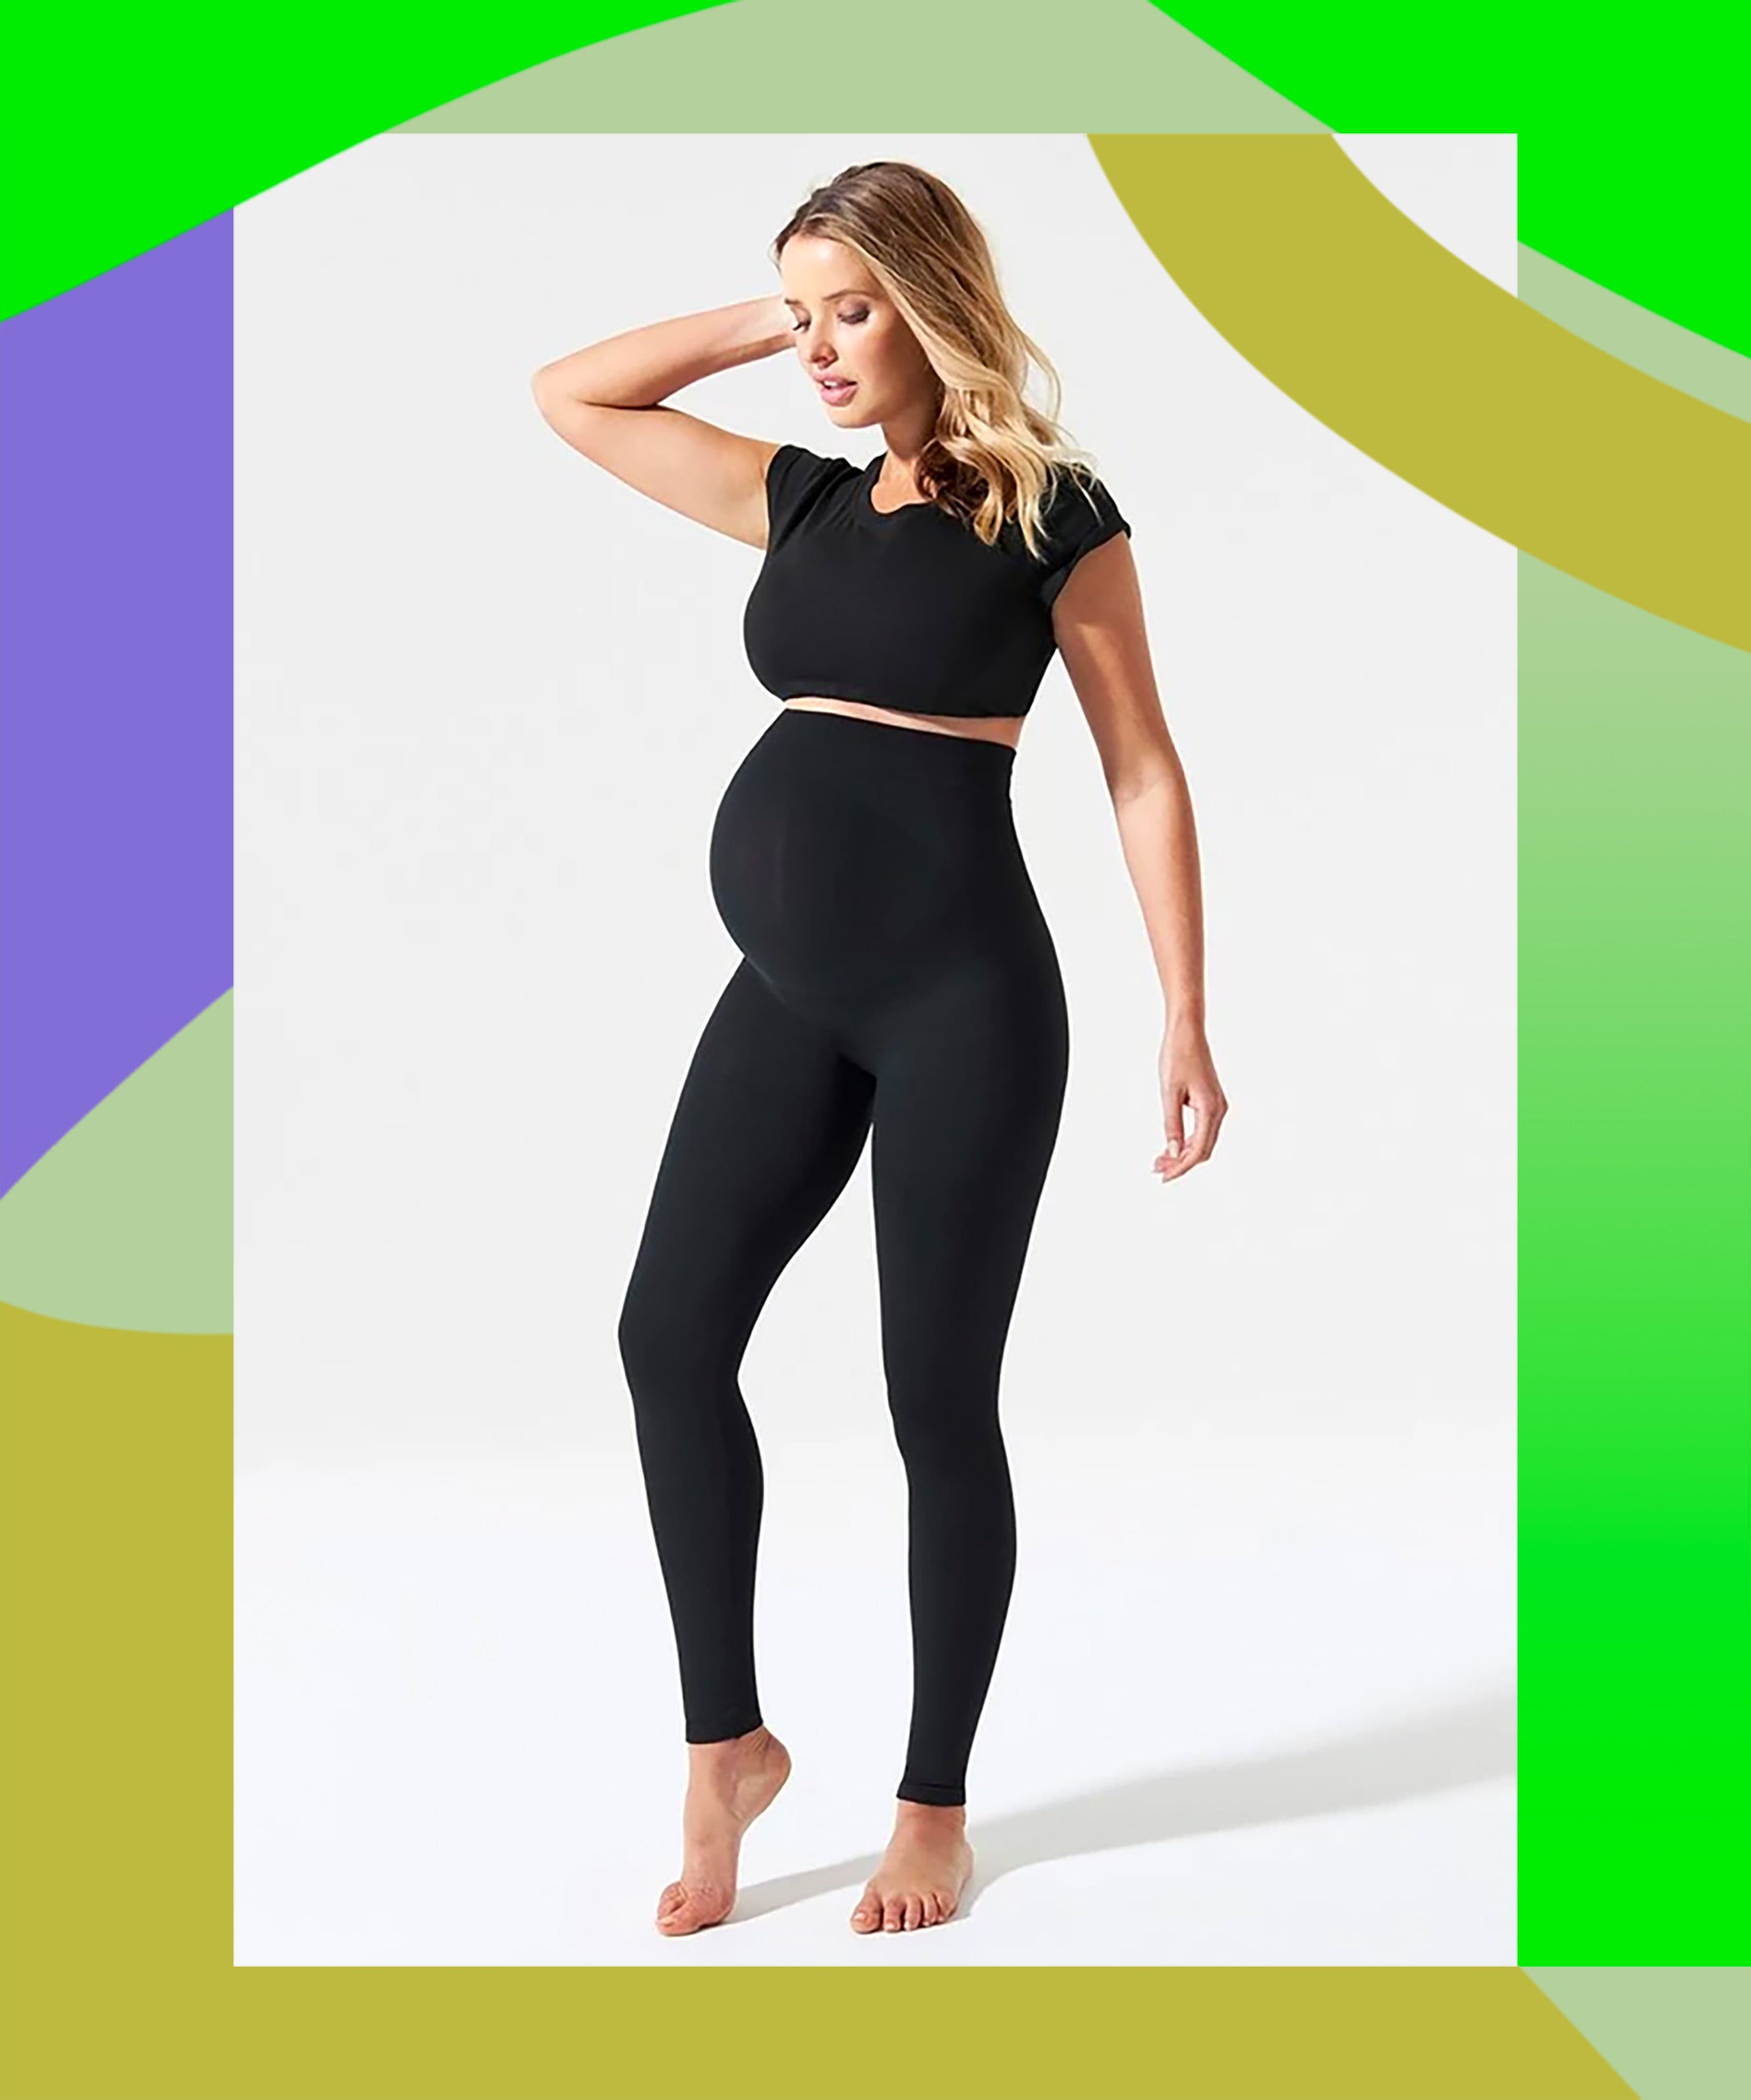 Maternity Leggings Review (Best for Bump Support) - YouTube